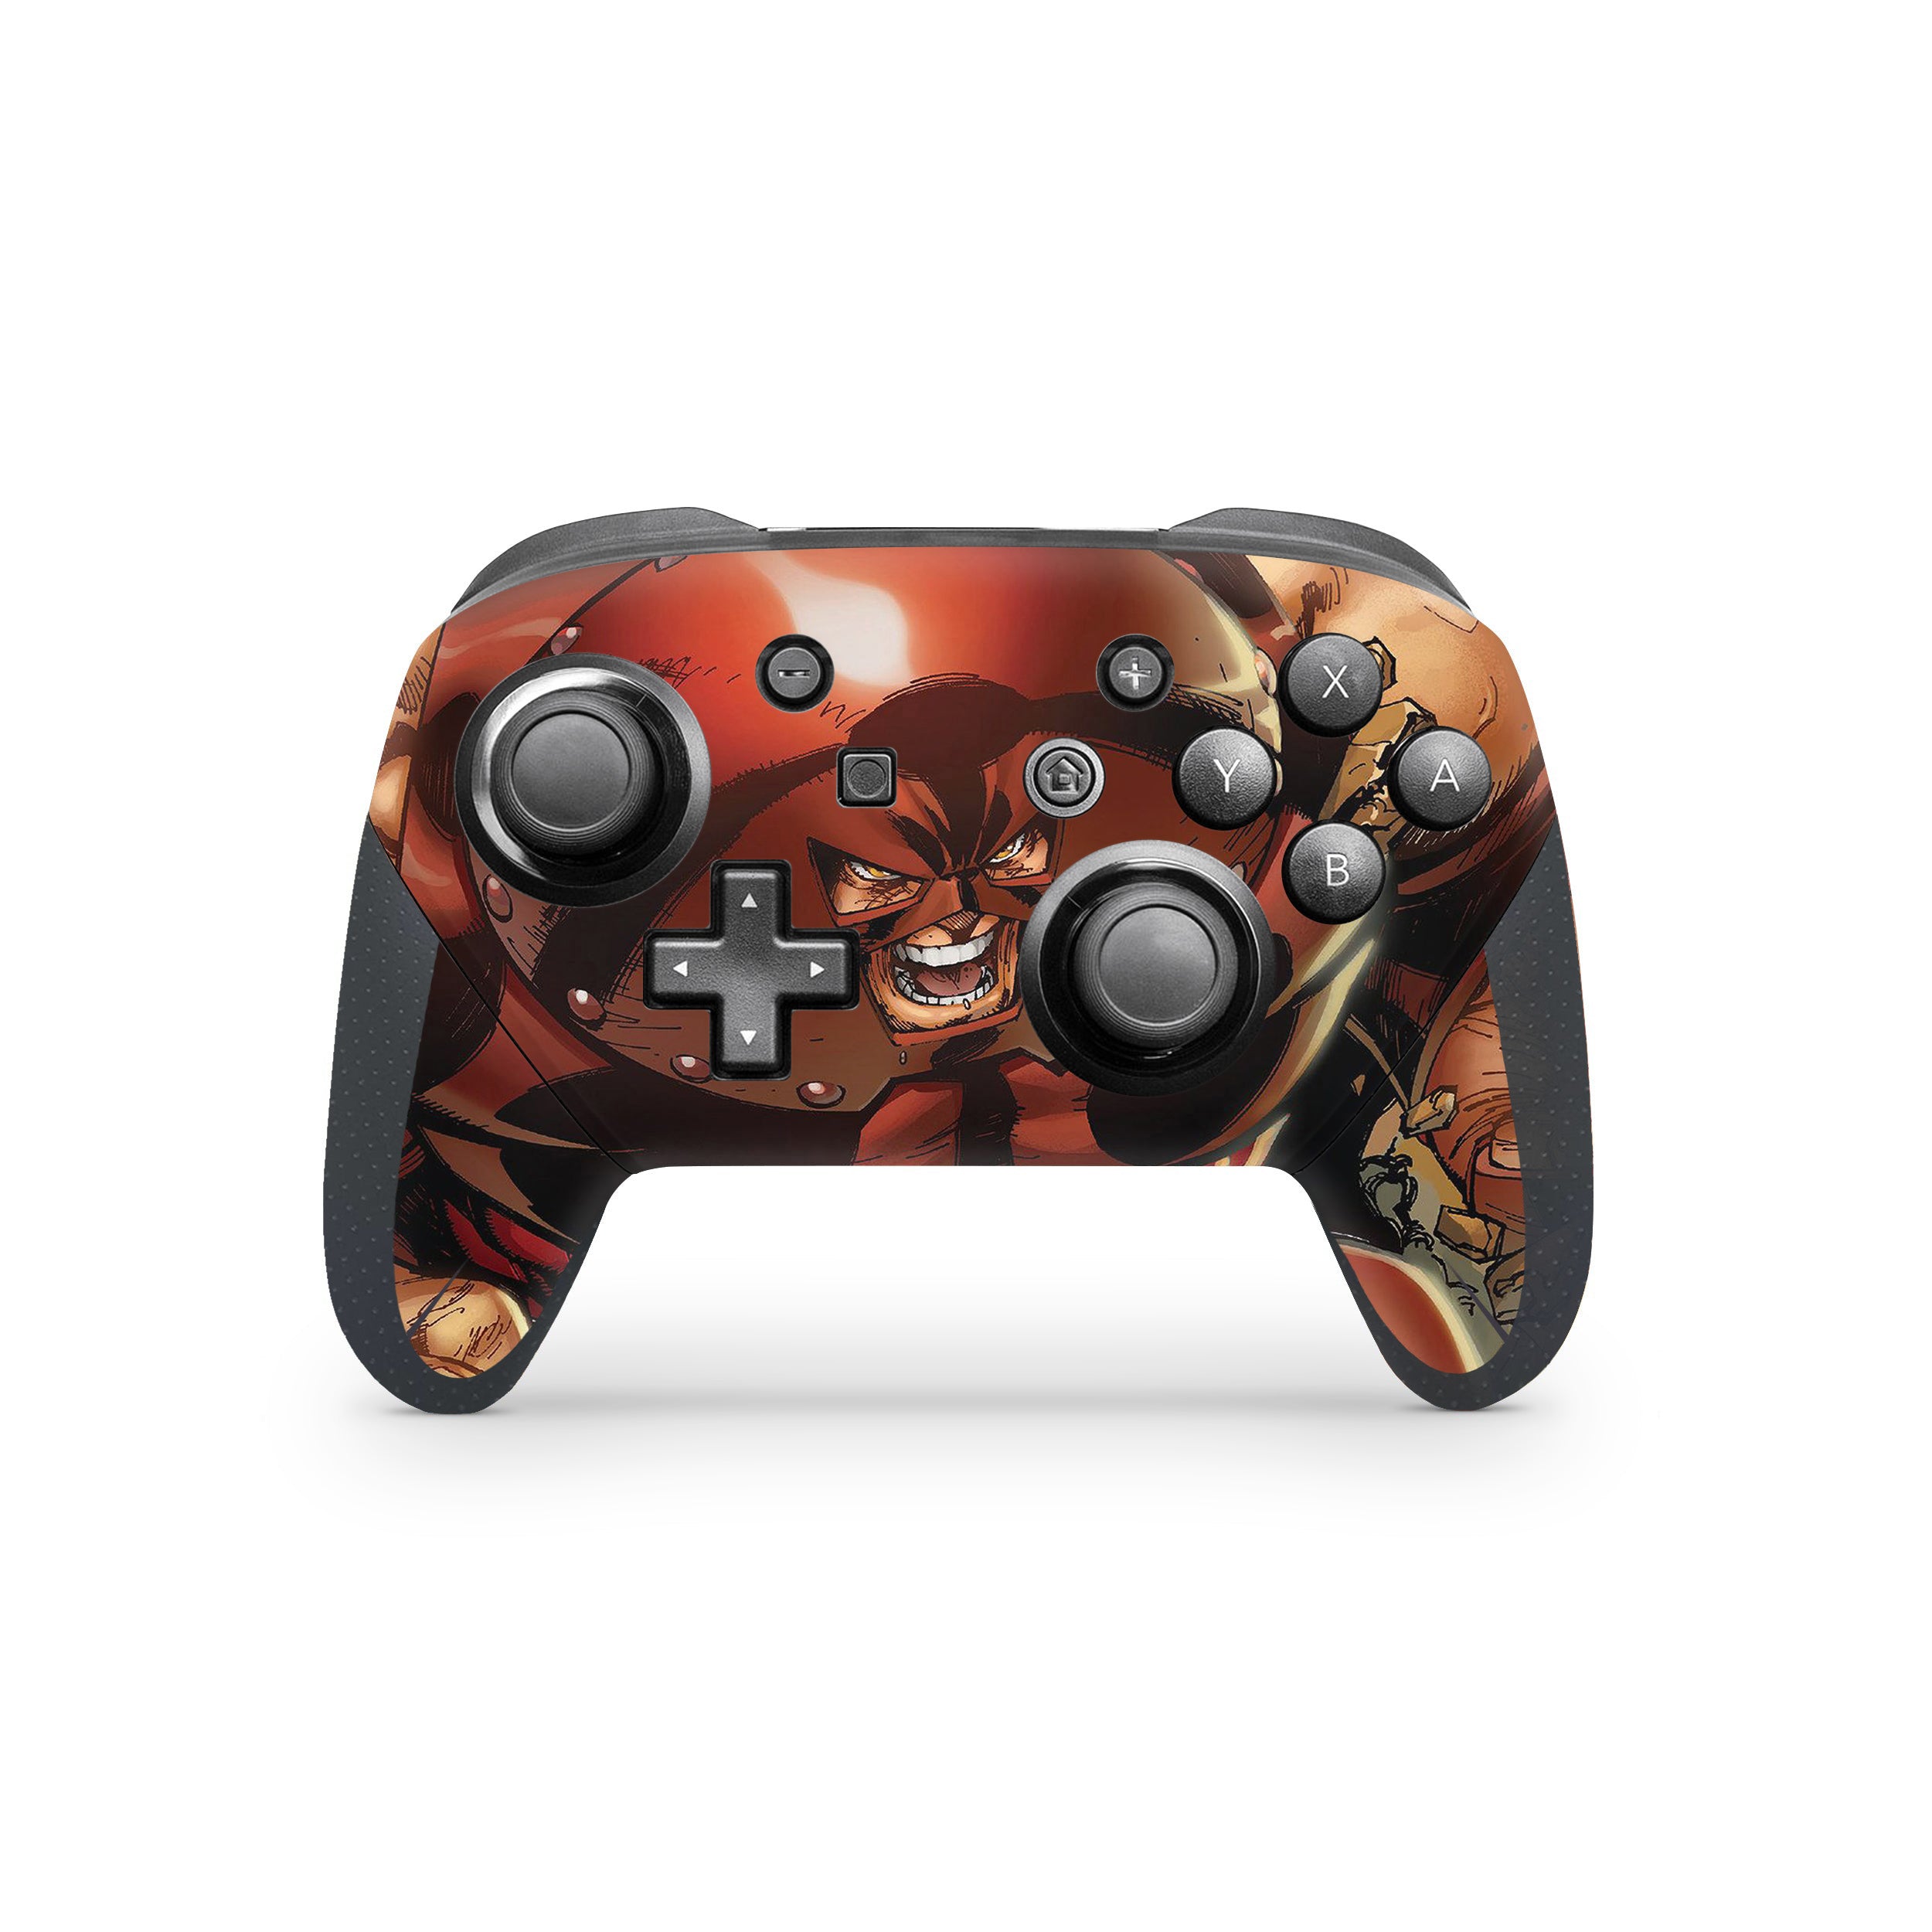 A video game skin featuring a Marvel Comics X Men Juggernaut design for the Switch Pro Controller.